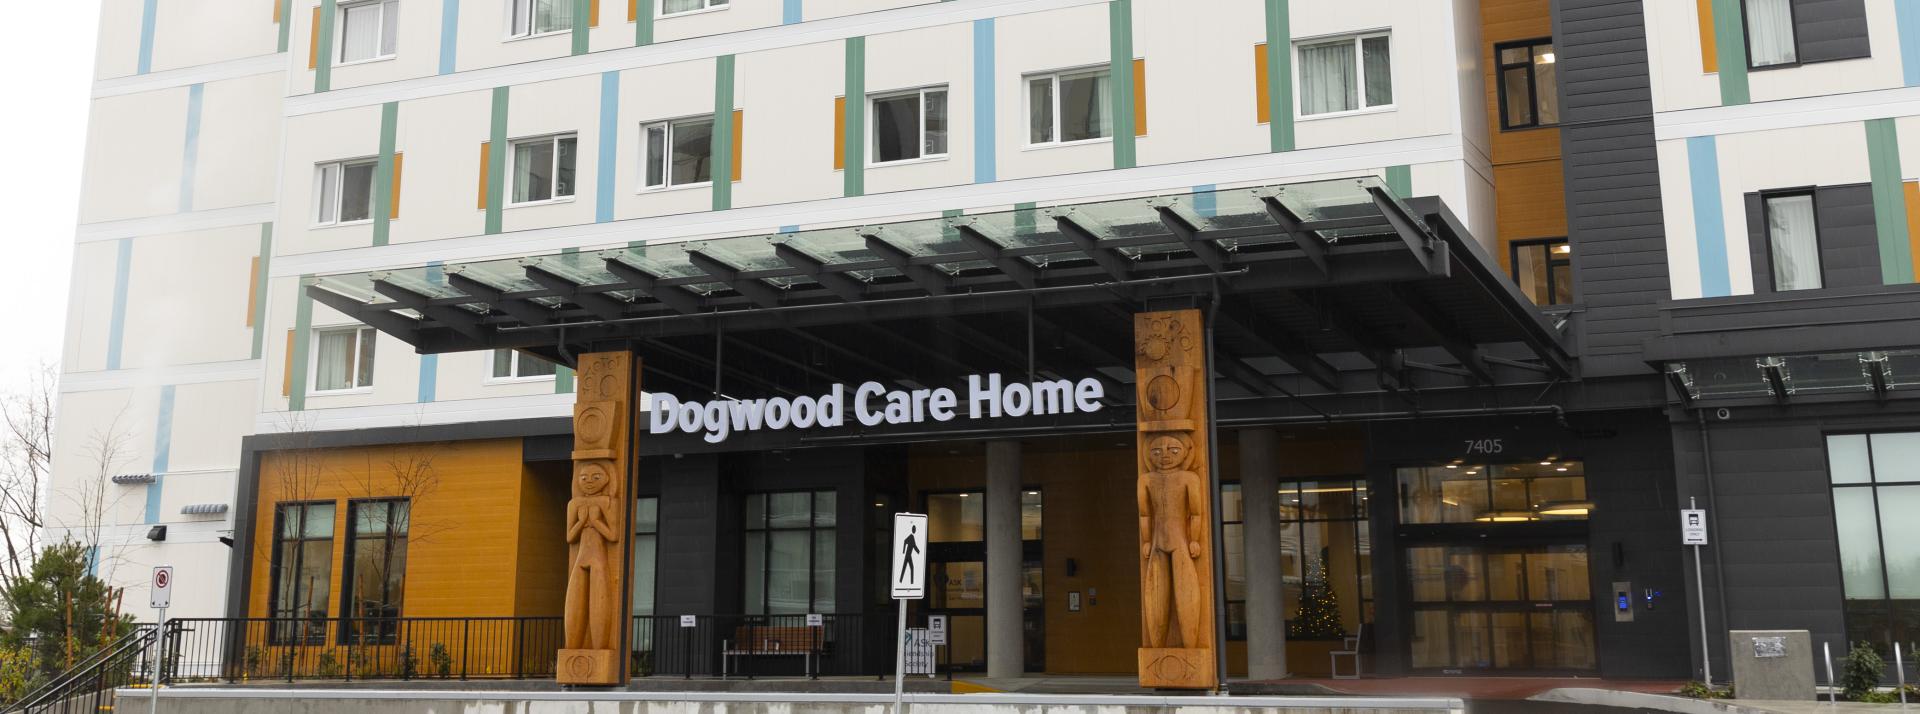 Exterior of the new Dogwood Care Home in South Vancouver with house posts designed by artists Brent Sparrow and Thomas Cannell